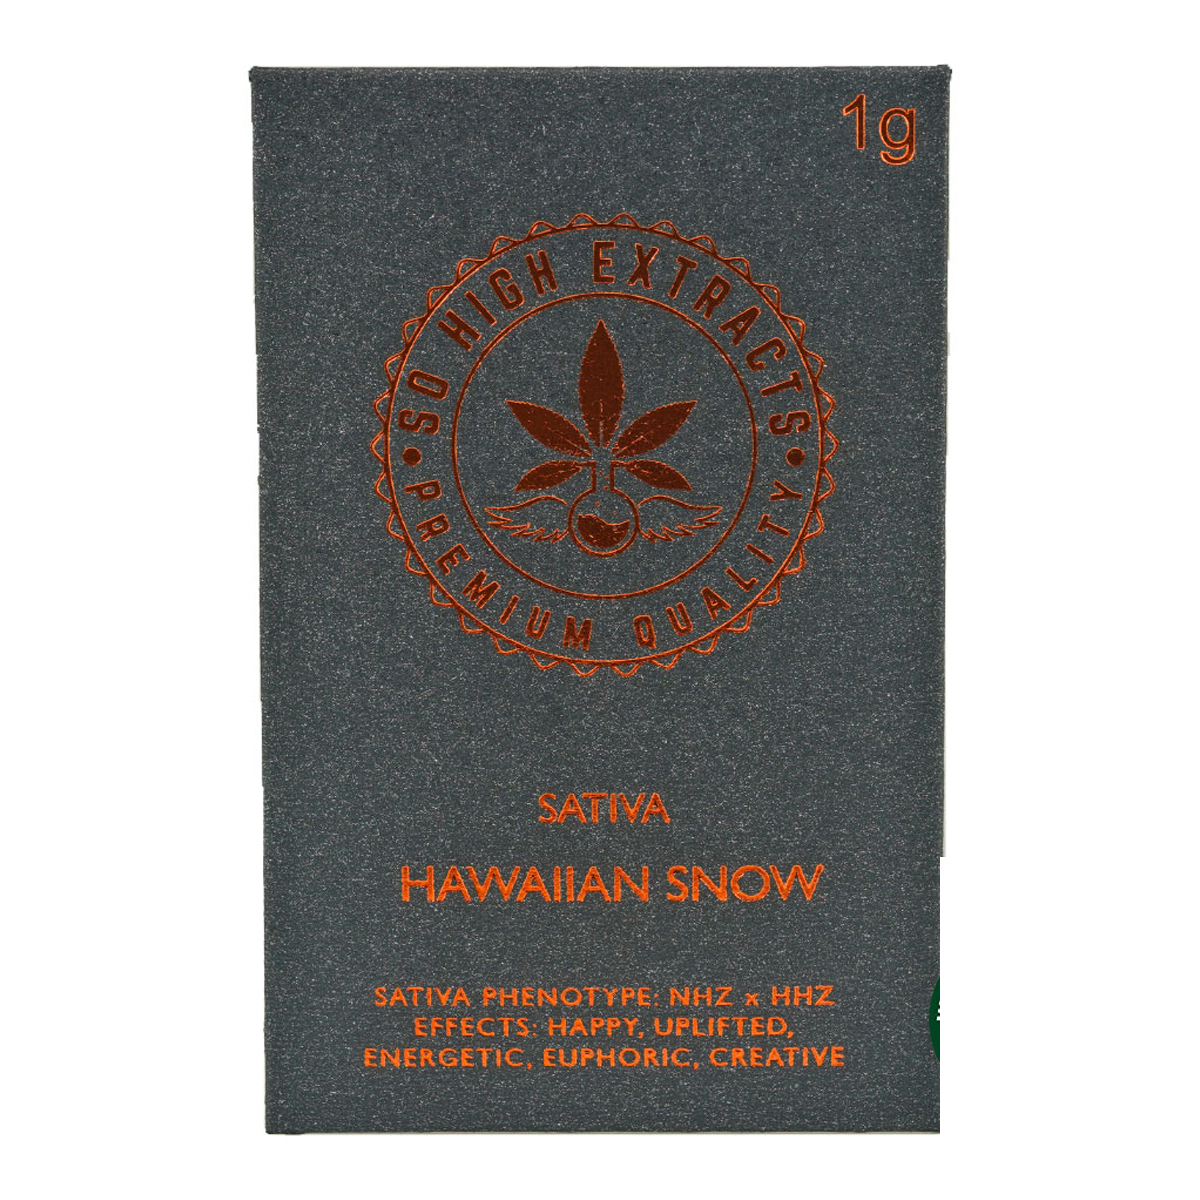 So High Extracts Premium Shatter - Hawaiian Snow 1g | Buy Shatter Online | Dispensary Near Me